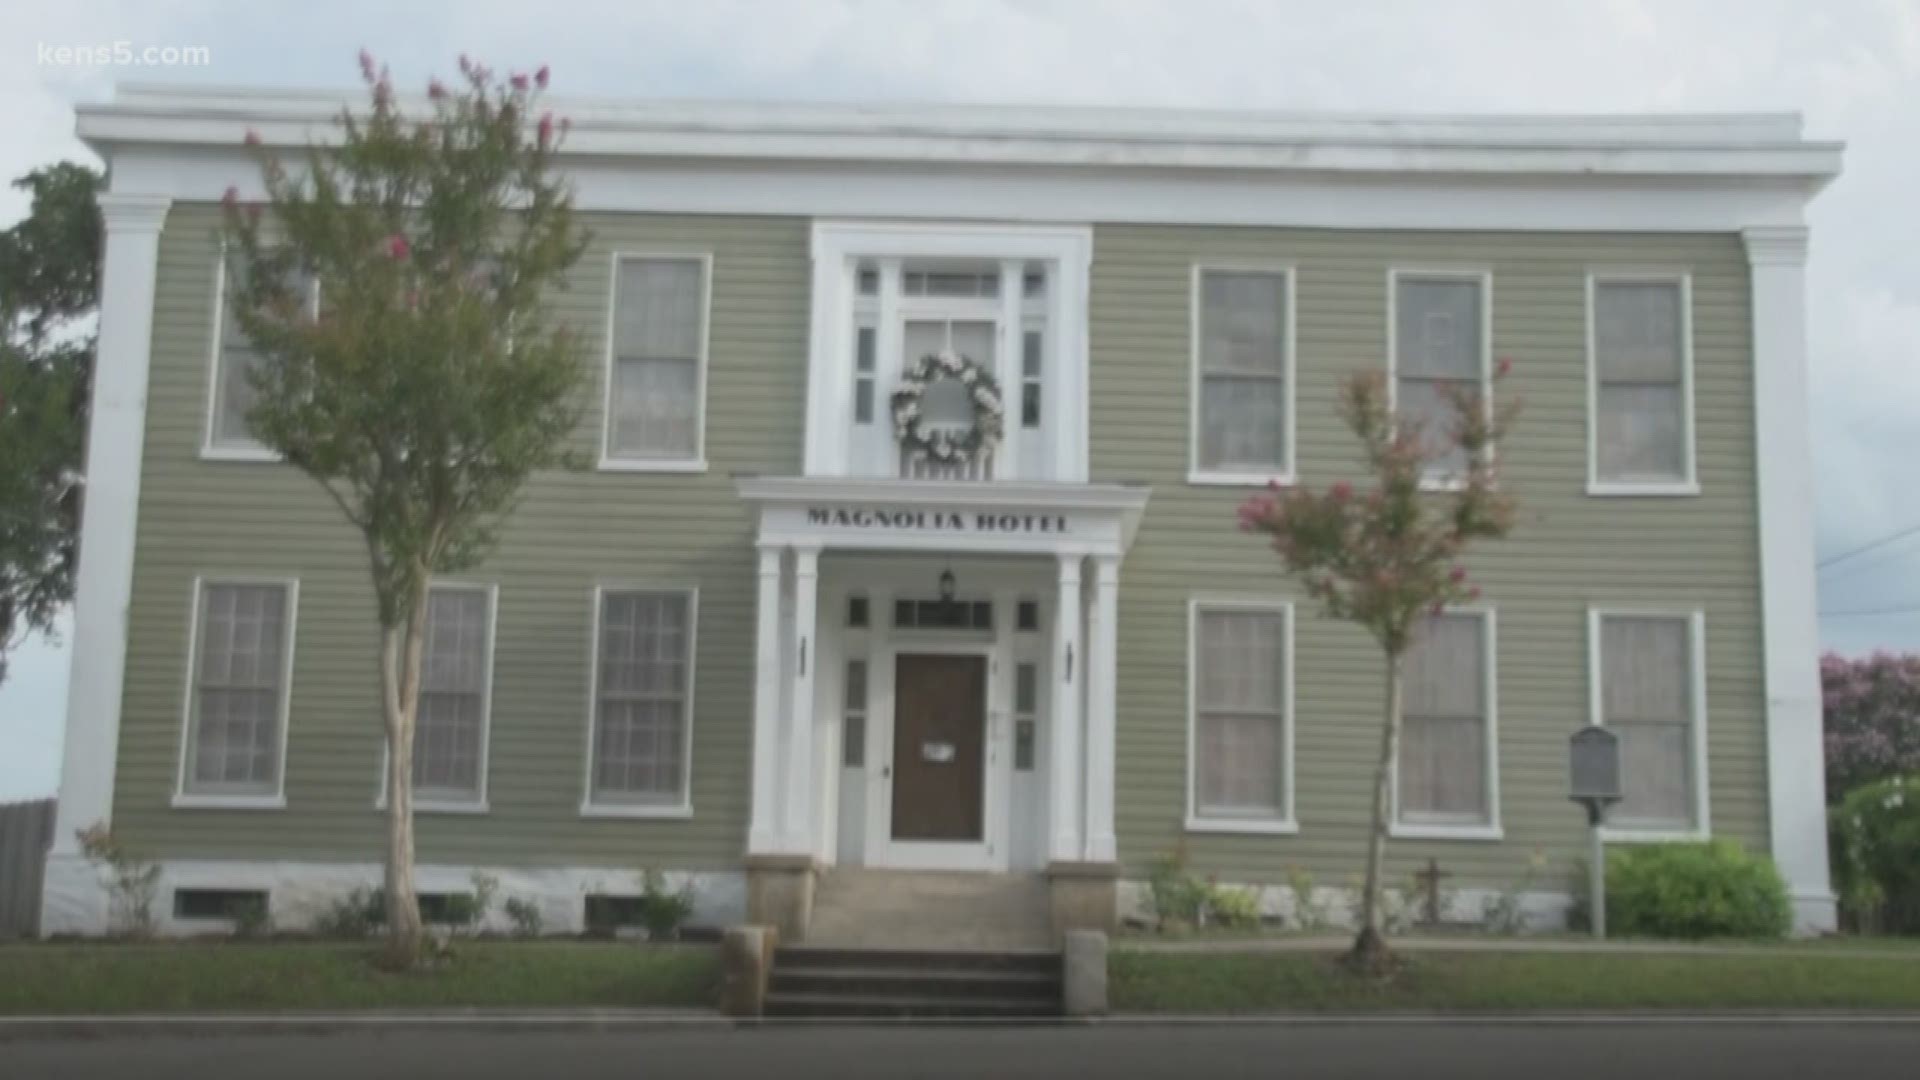 The owners of the Magnolia Hotel said that ghosts are known to roam the halls of the nearly 200-year-old hotel that's been closed to the public for decades.